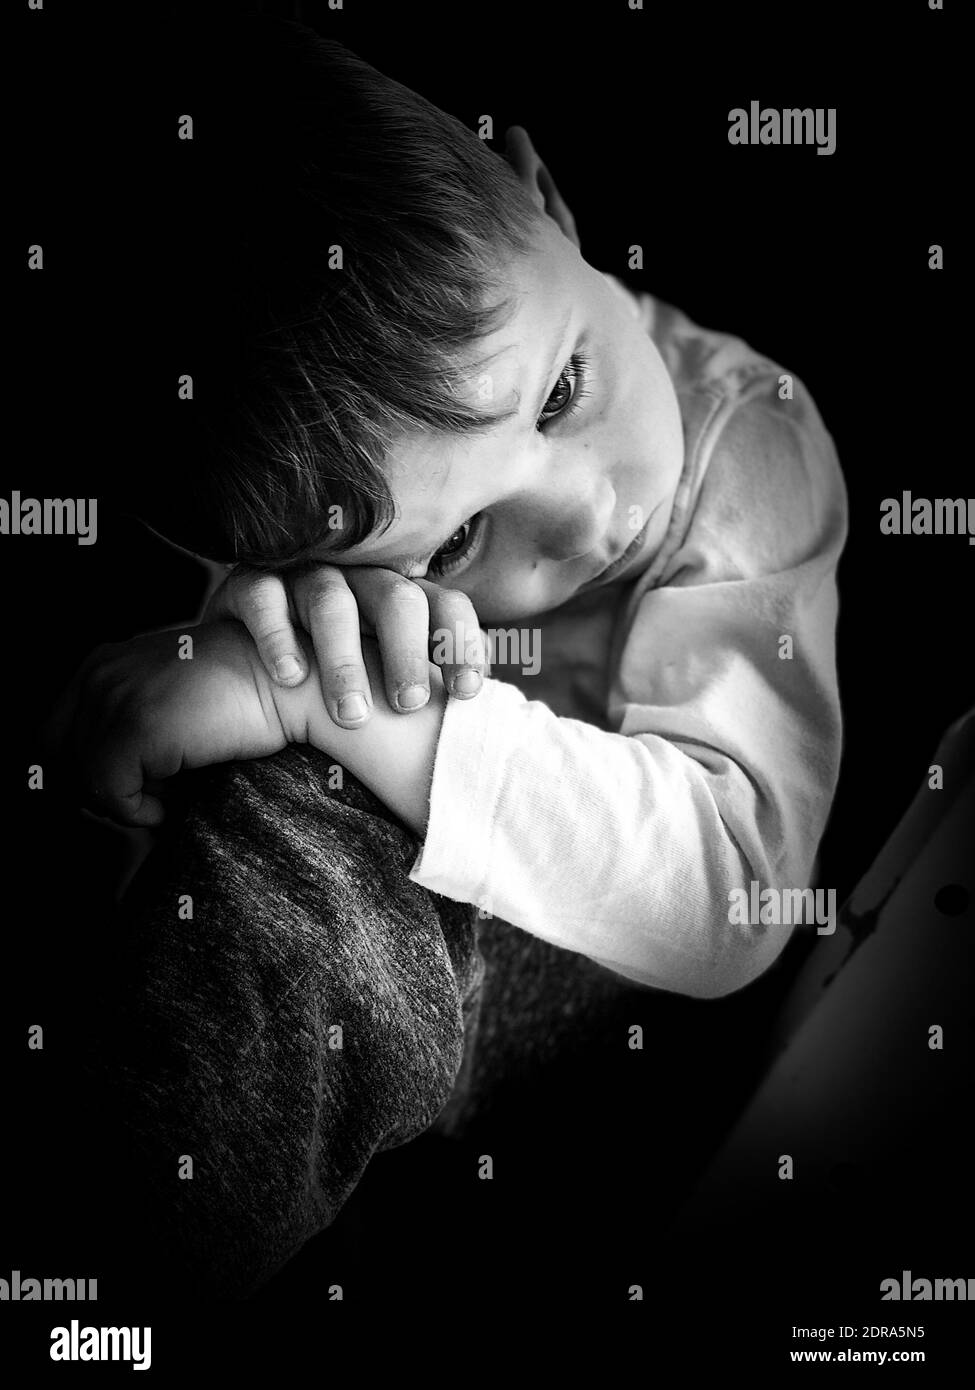 Close-up Of Sad Boy Looking Away While Relaxing Against Black Background  Stock Photo - Alamy